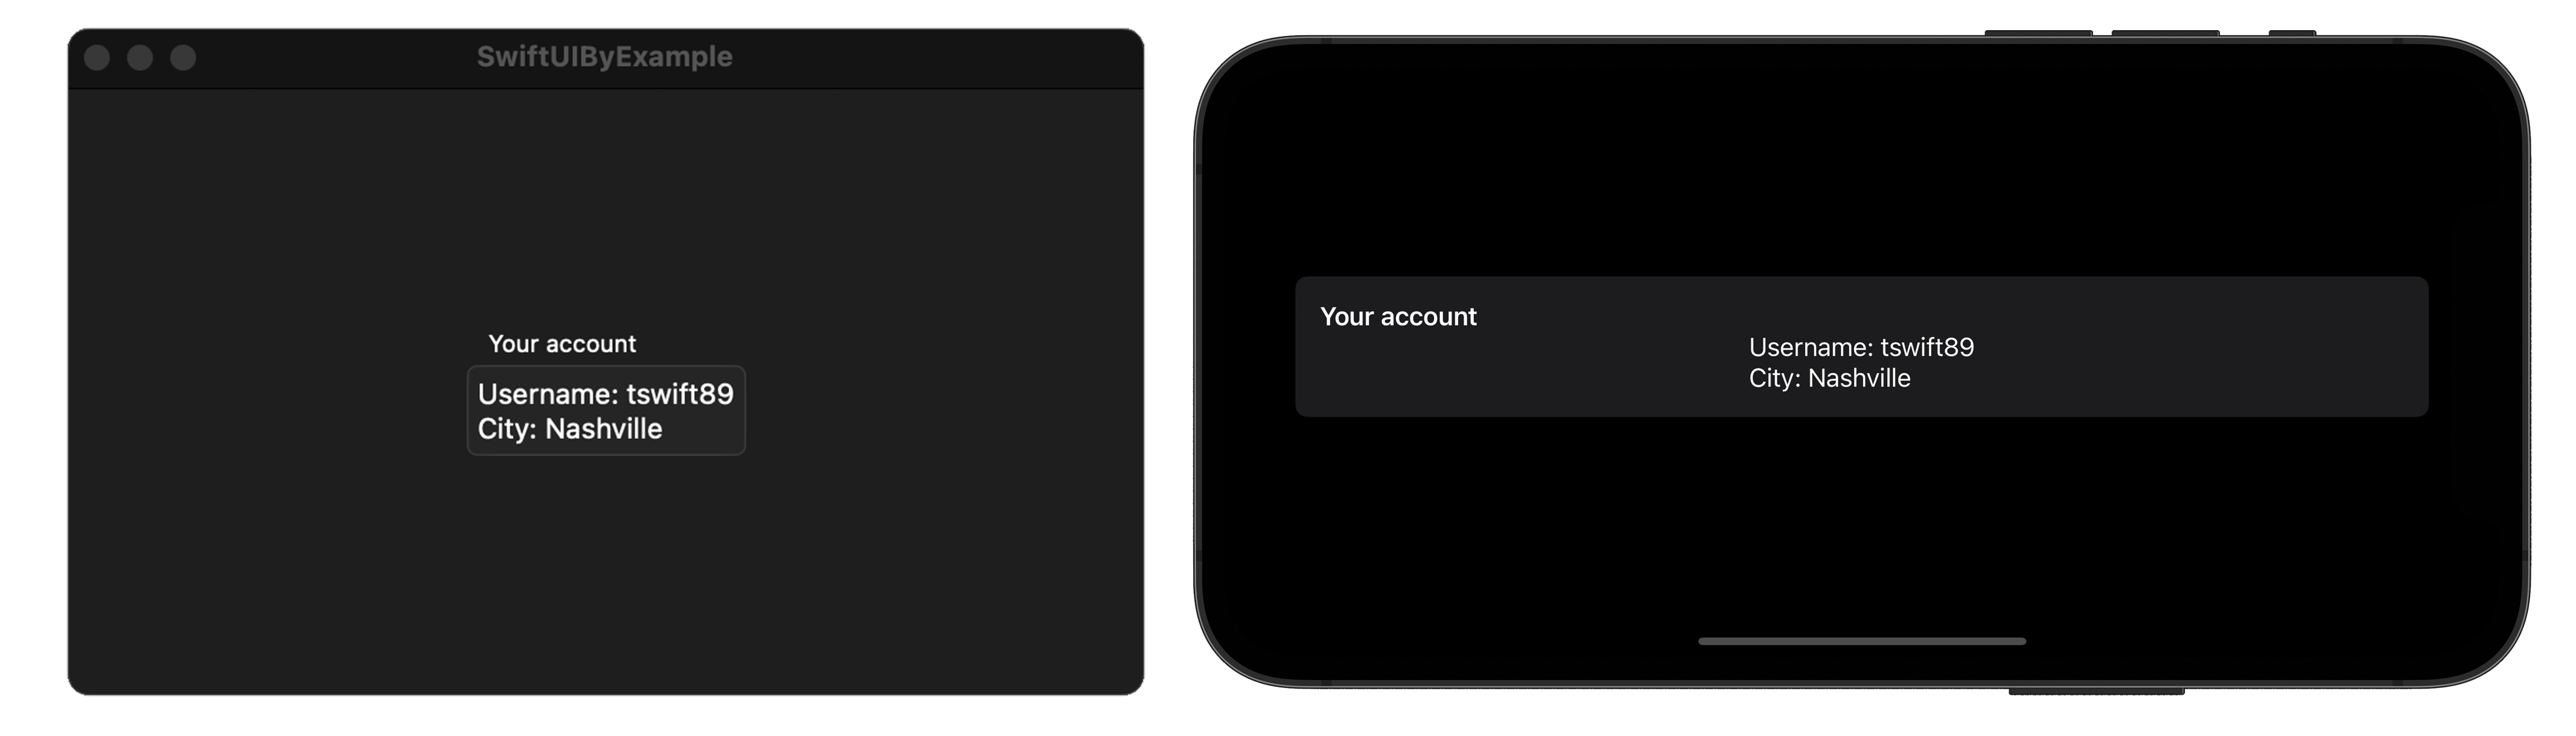 A macOS window containing “Your account” above a two lines of text in a rounded rectangle. Beside it is an iPhone with similar contents consuming horizontal space, resulting in a visual imbalance.